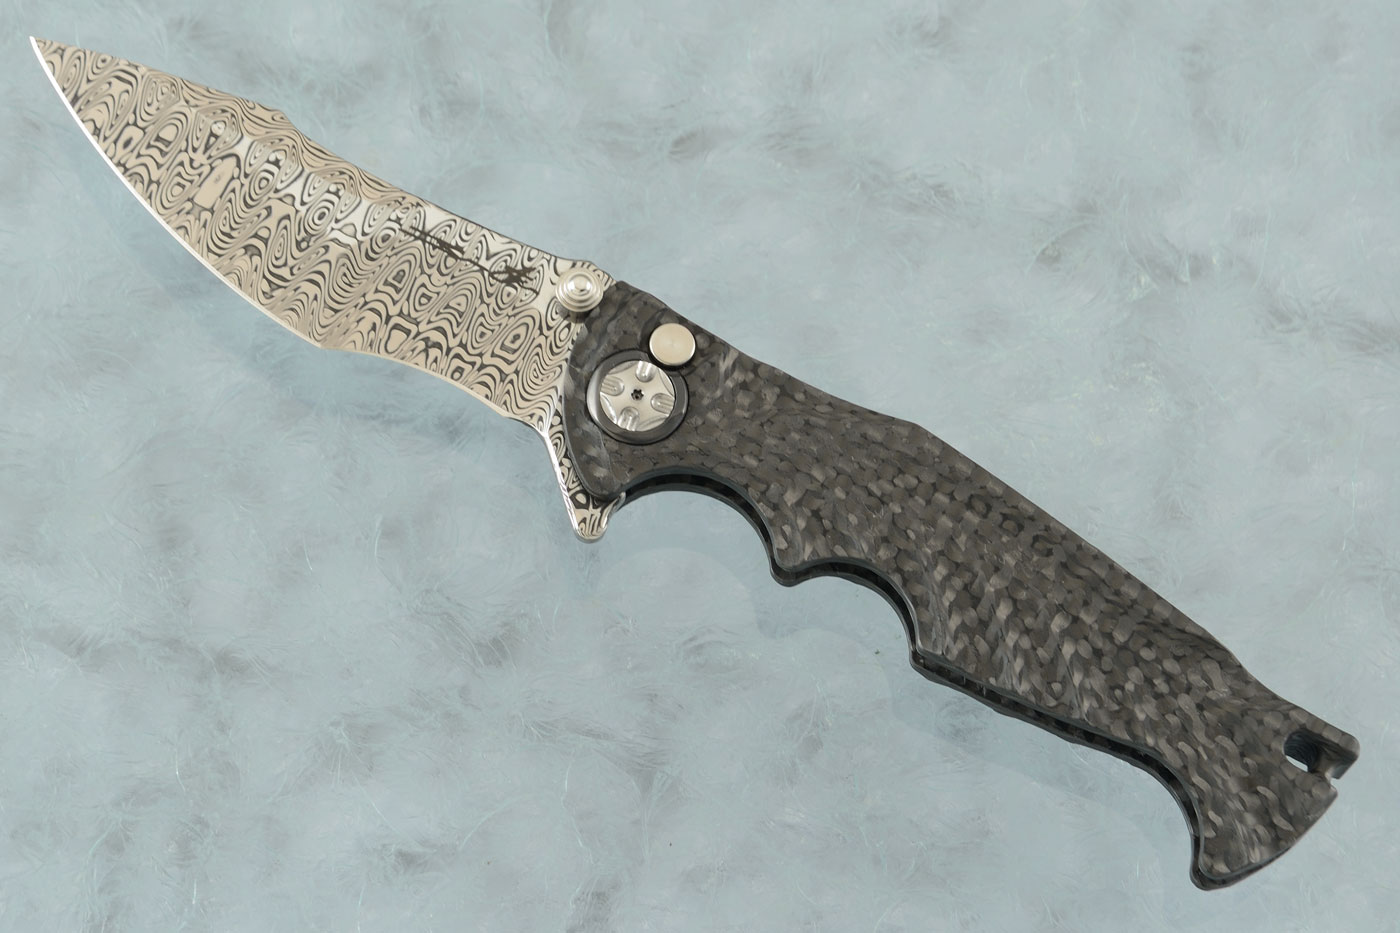 Tighe Breaker 3.5 Integral with Carbon Fiber and Damasteel